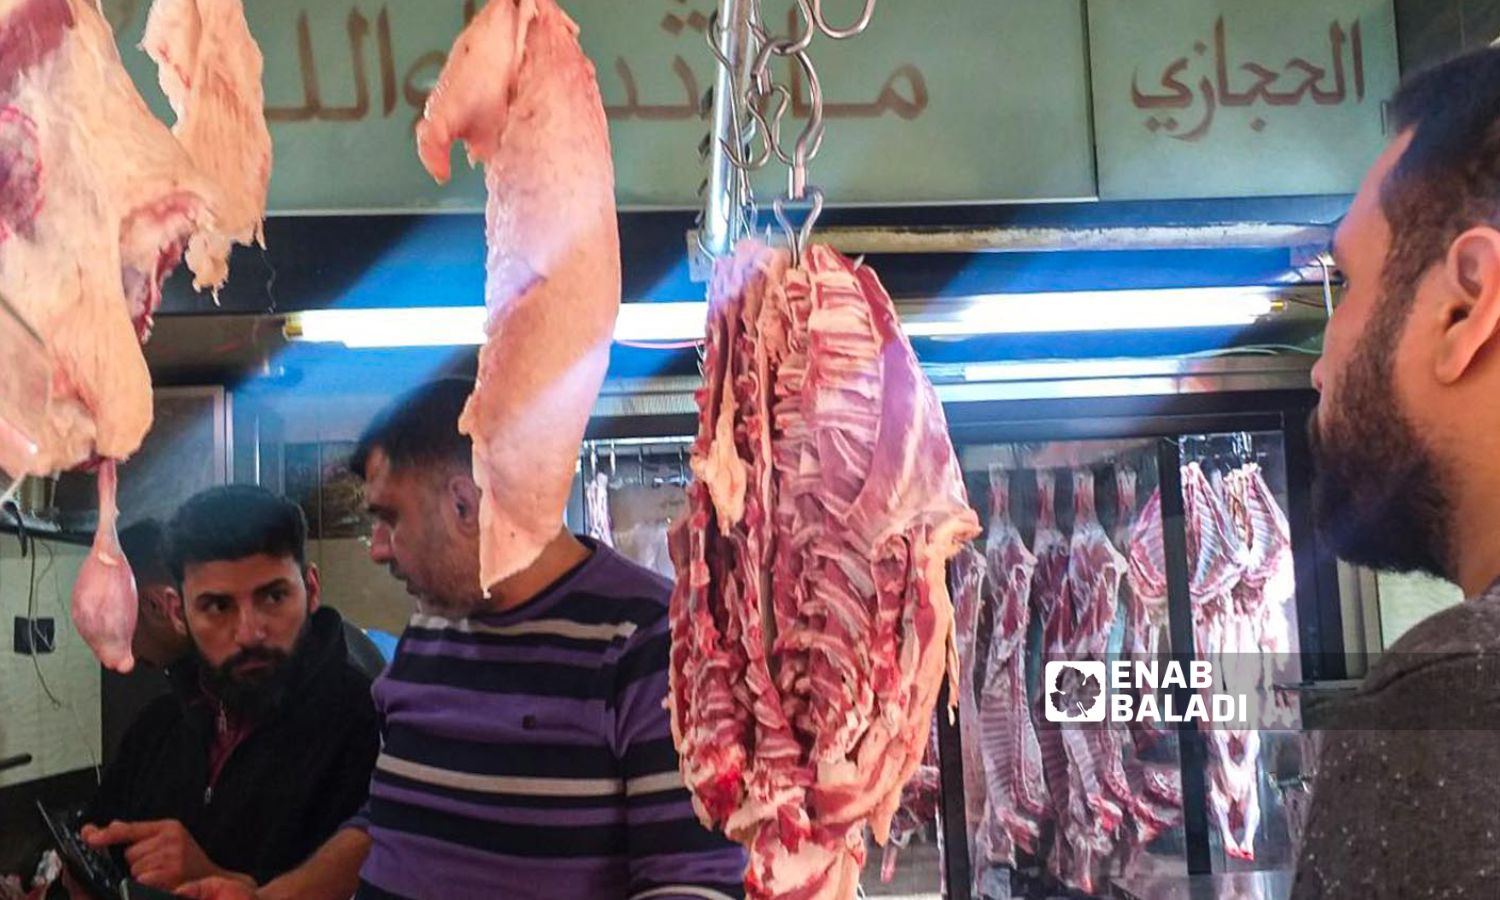 A butcher shop in the Bab Srejah market in Damascus - March 30, 2022 (Enab Baladi/Hassan Hassan)